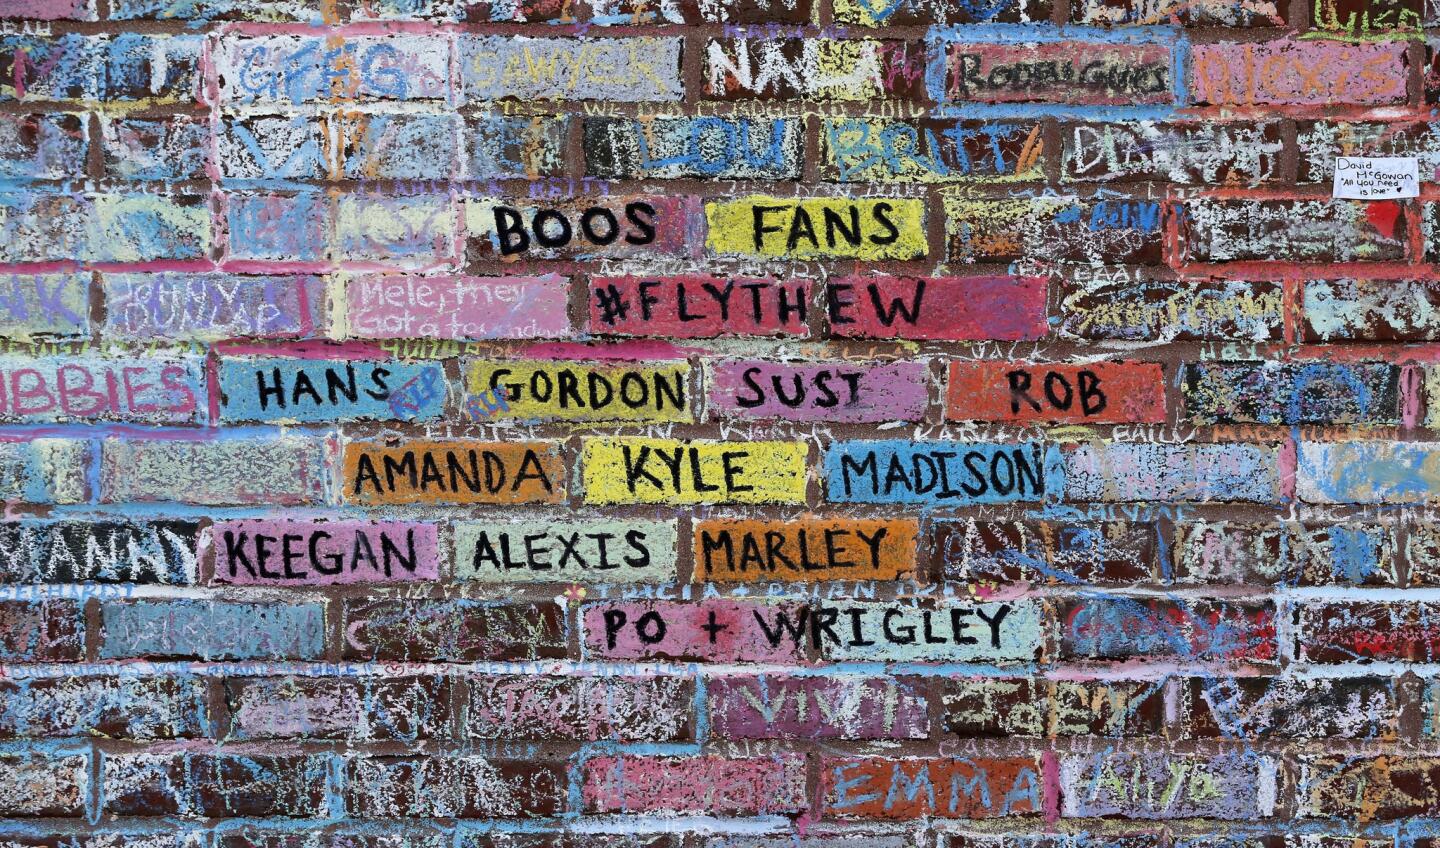 Chalk messages on the Wrigley Field wall